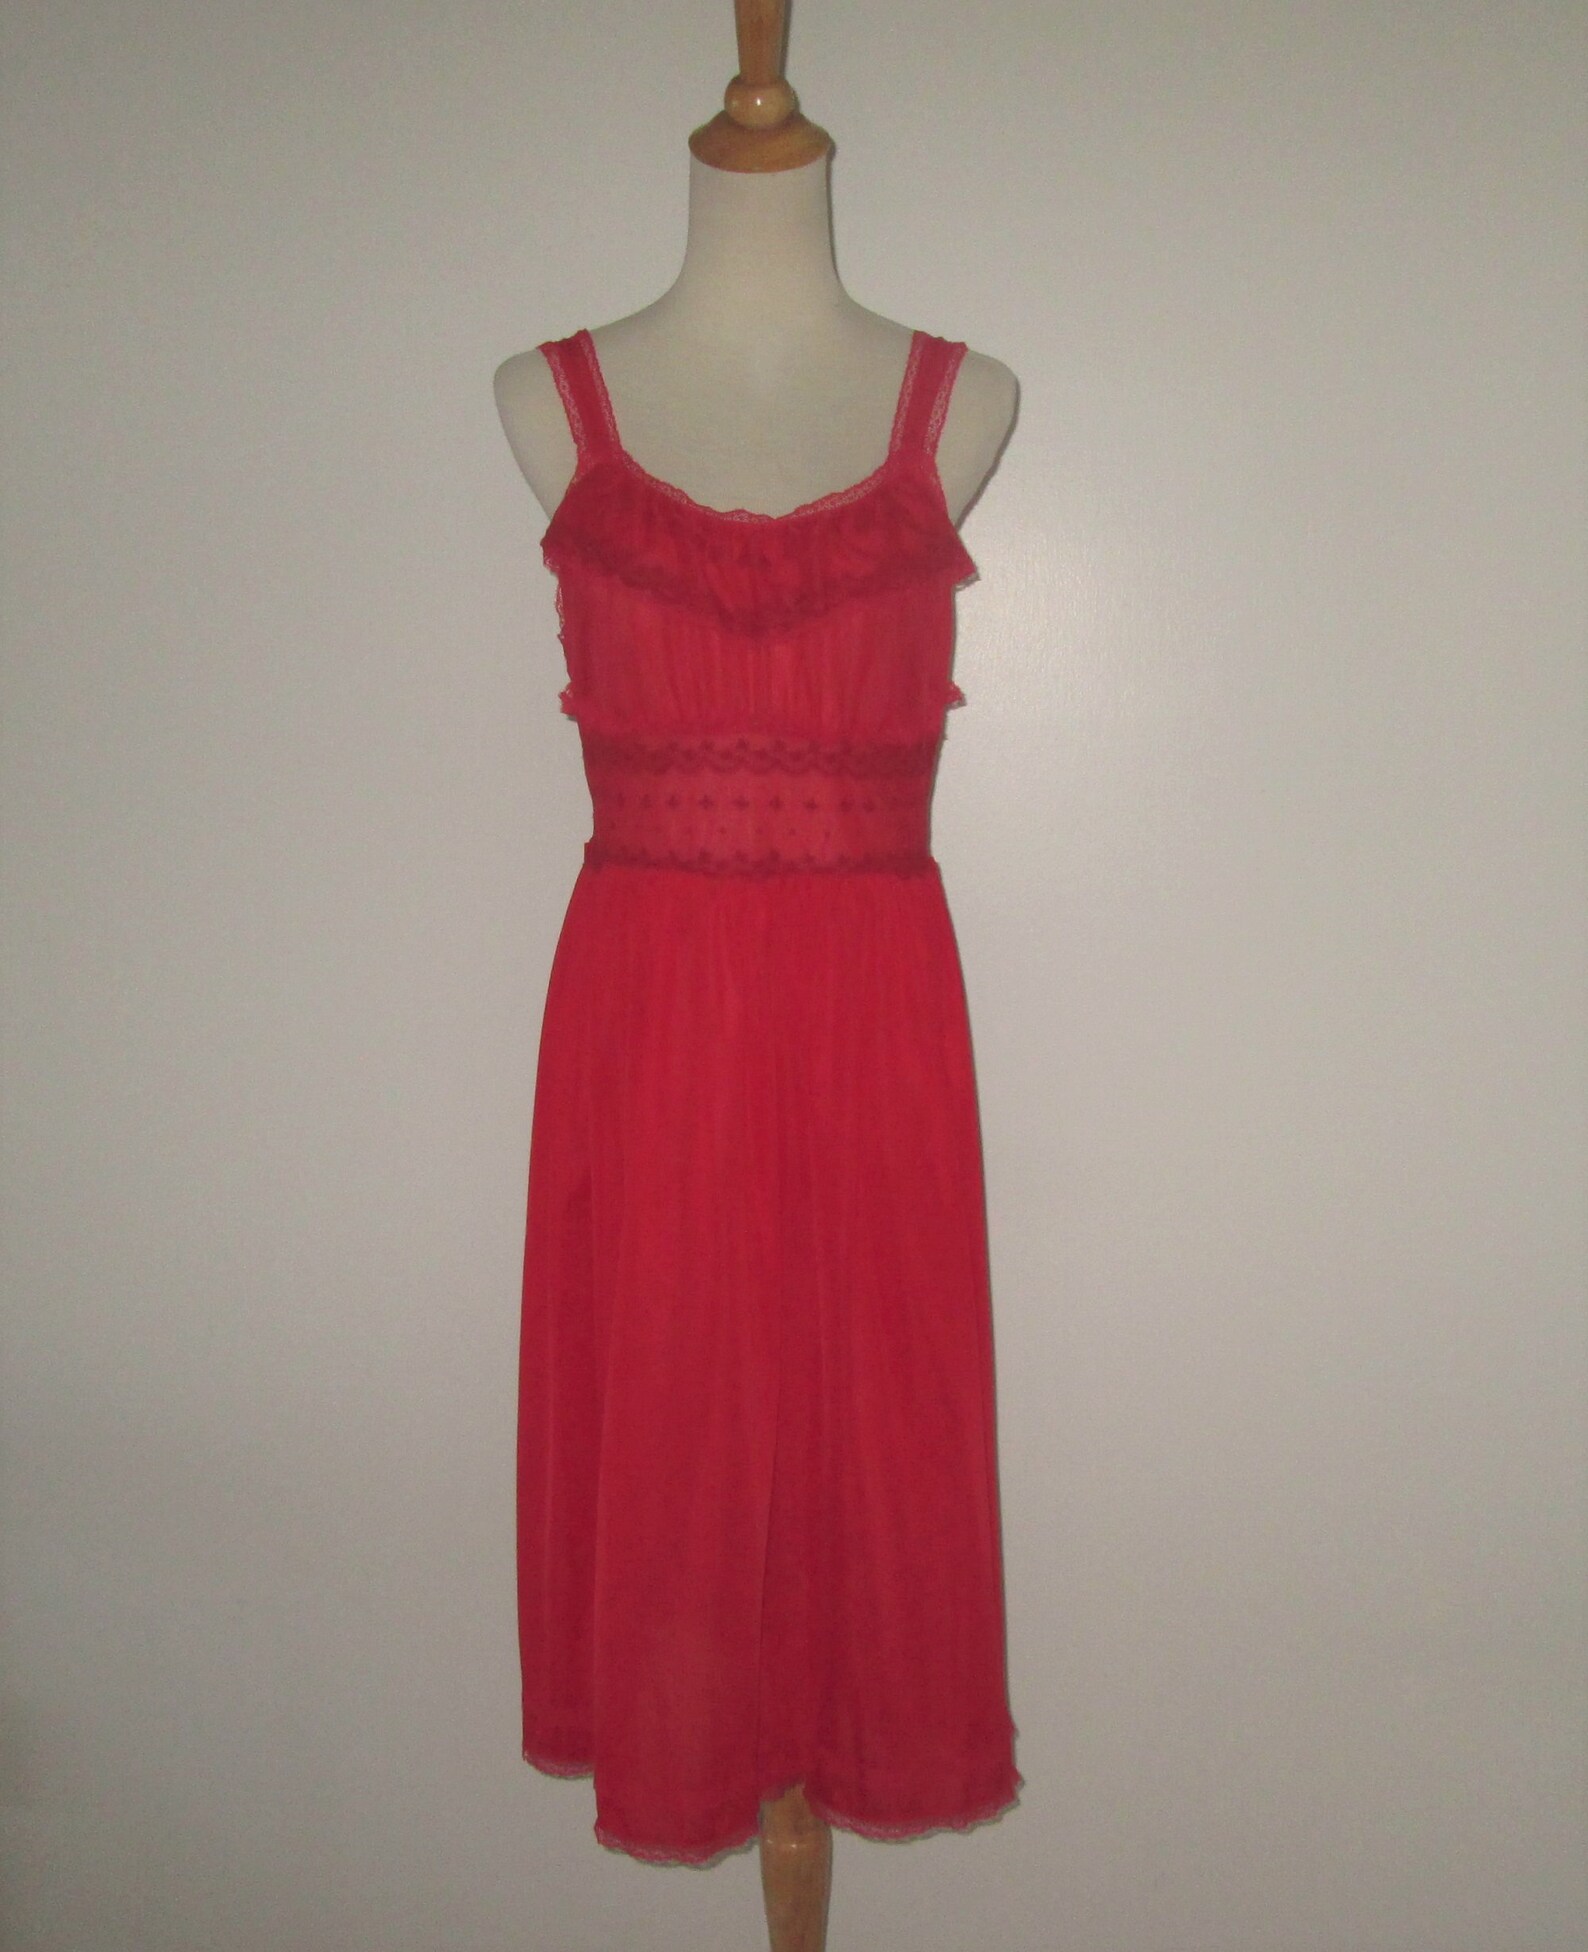 Vintage 1950s Red Nightgown With Lace Embroidered Accents by - Etsy